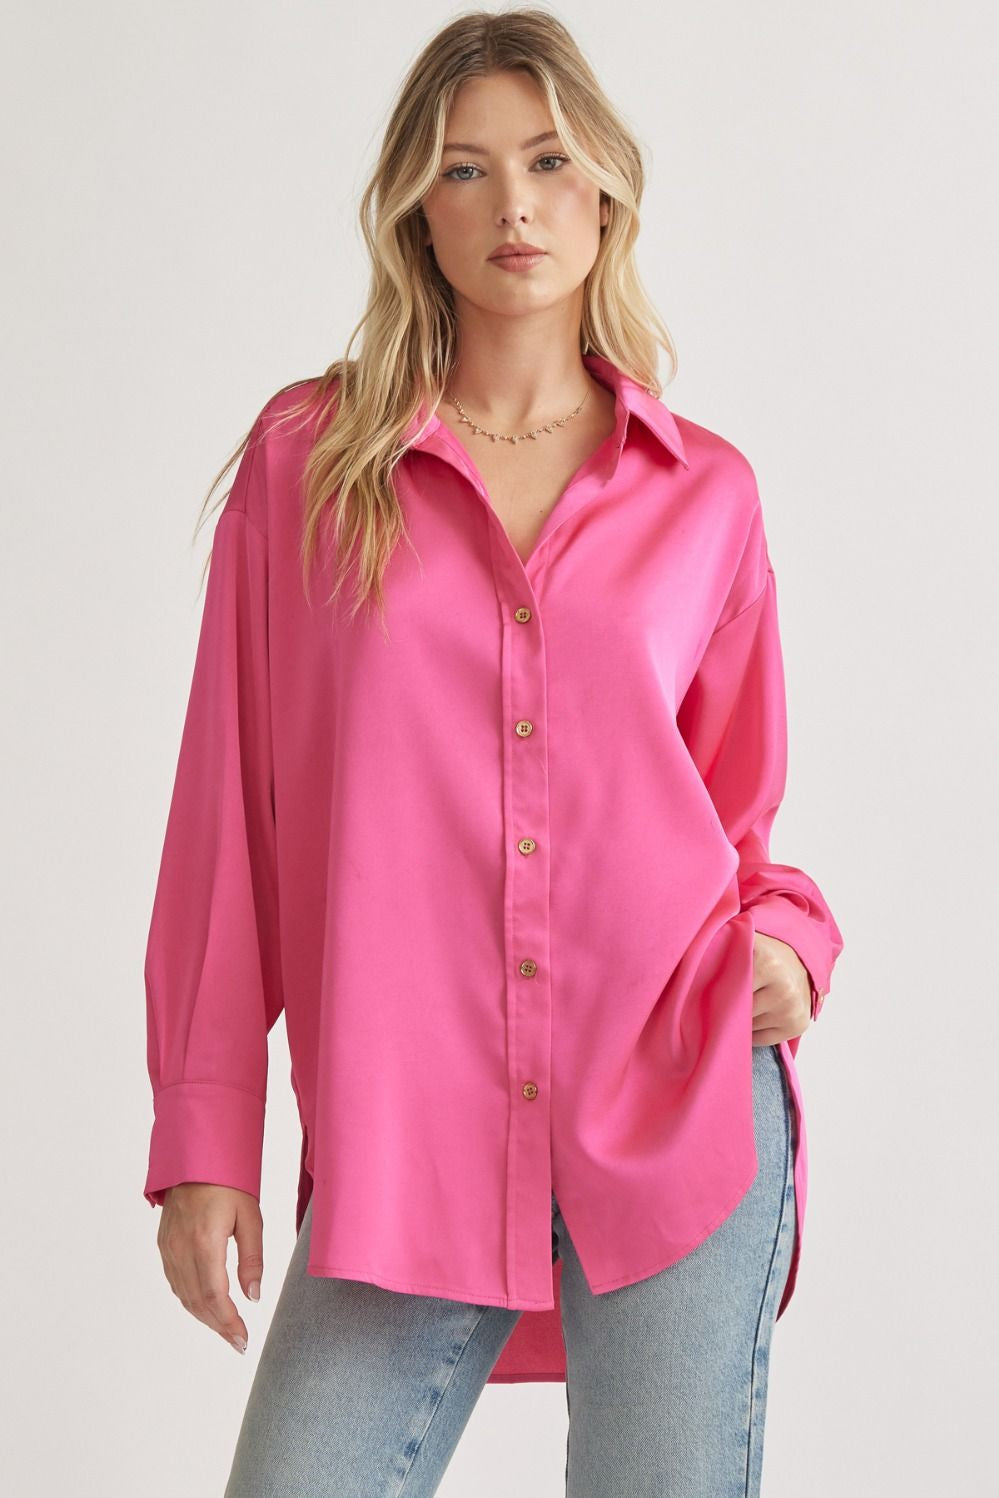 Down To Business Button Up - Hot Pink